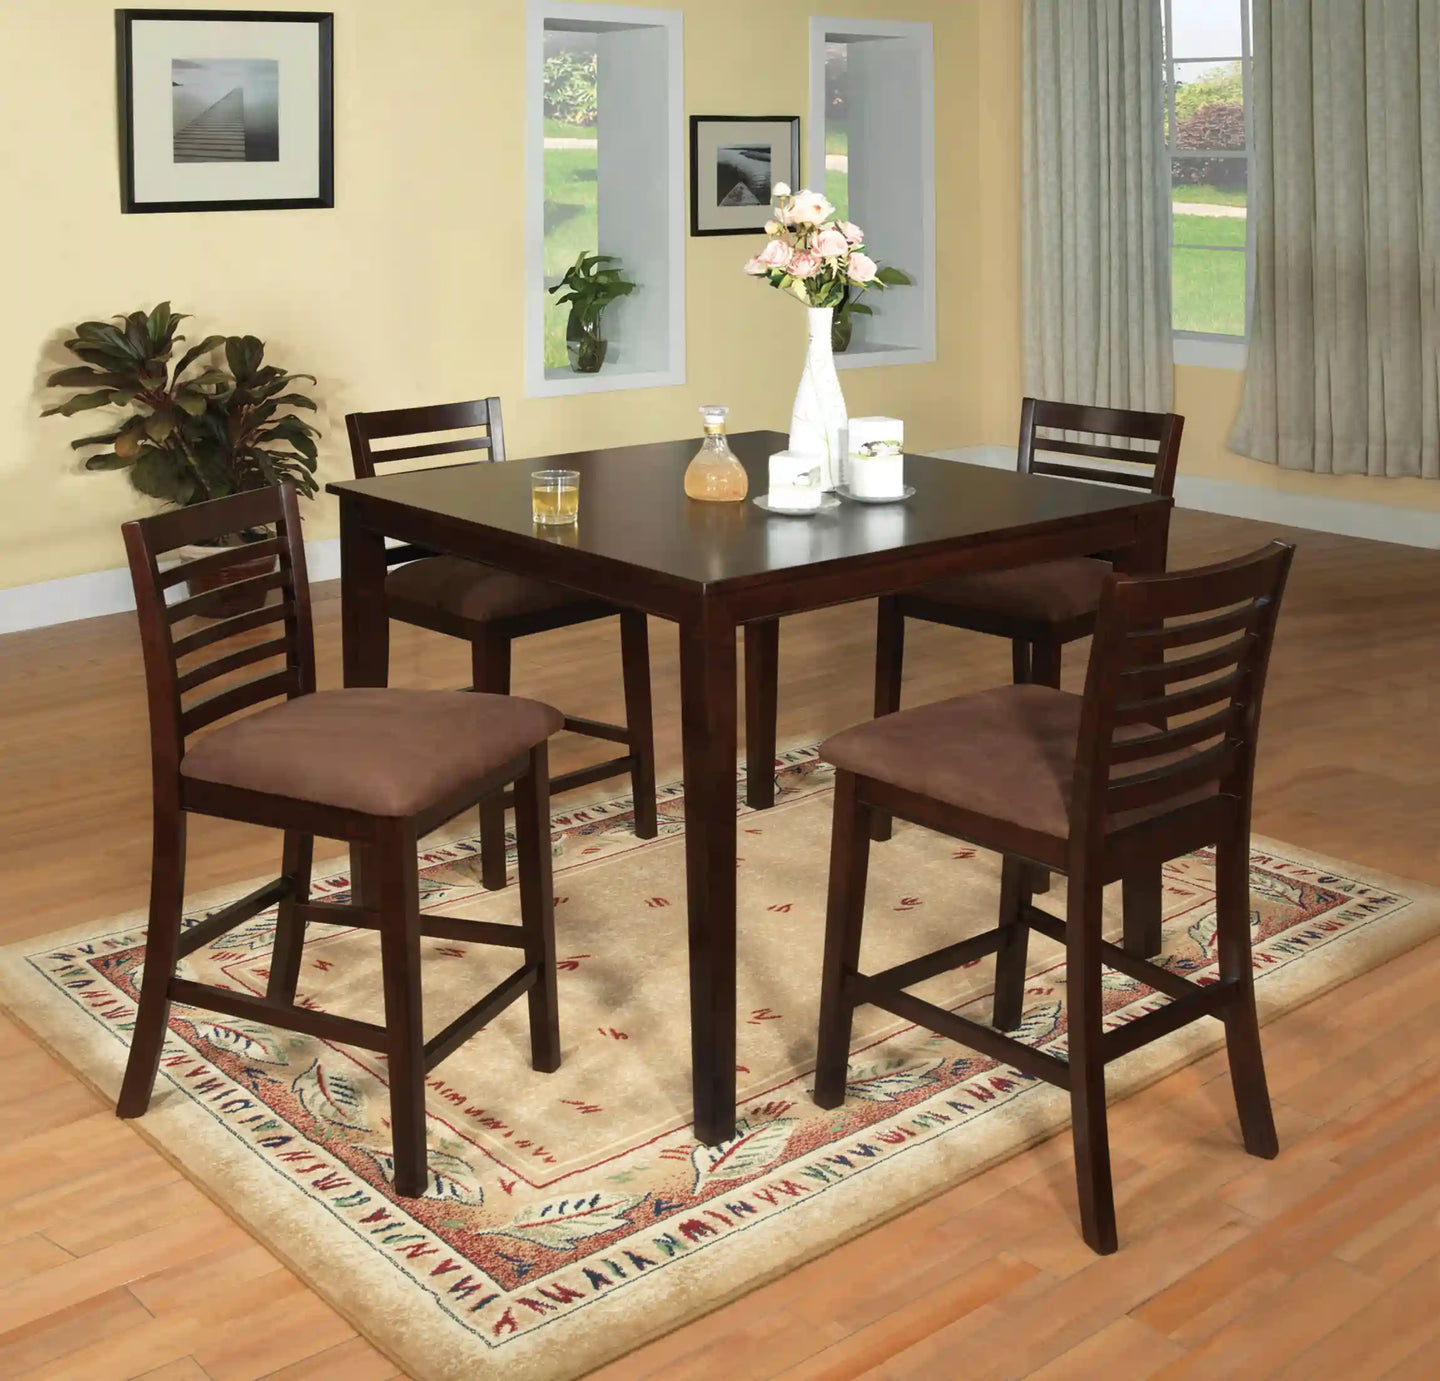 Furniture of America Landon Transitional 5-Piece Solid Wood Counter Height Dining Set - IDF-3001PT-5PK